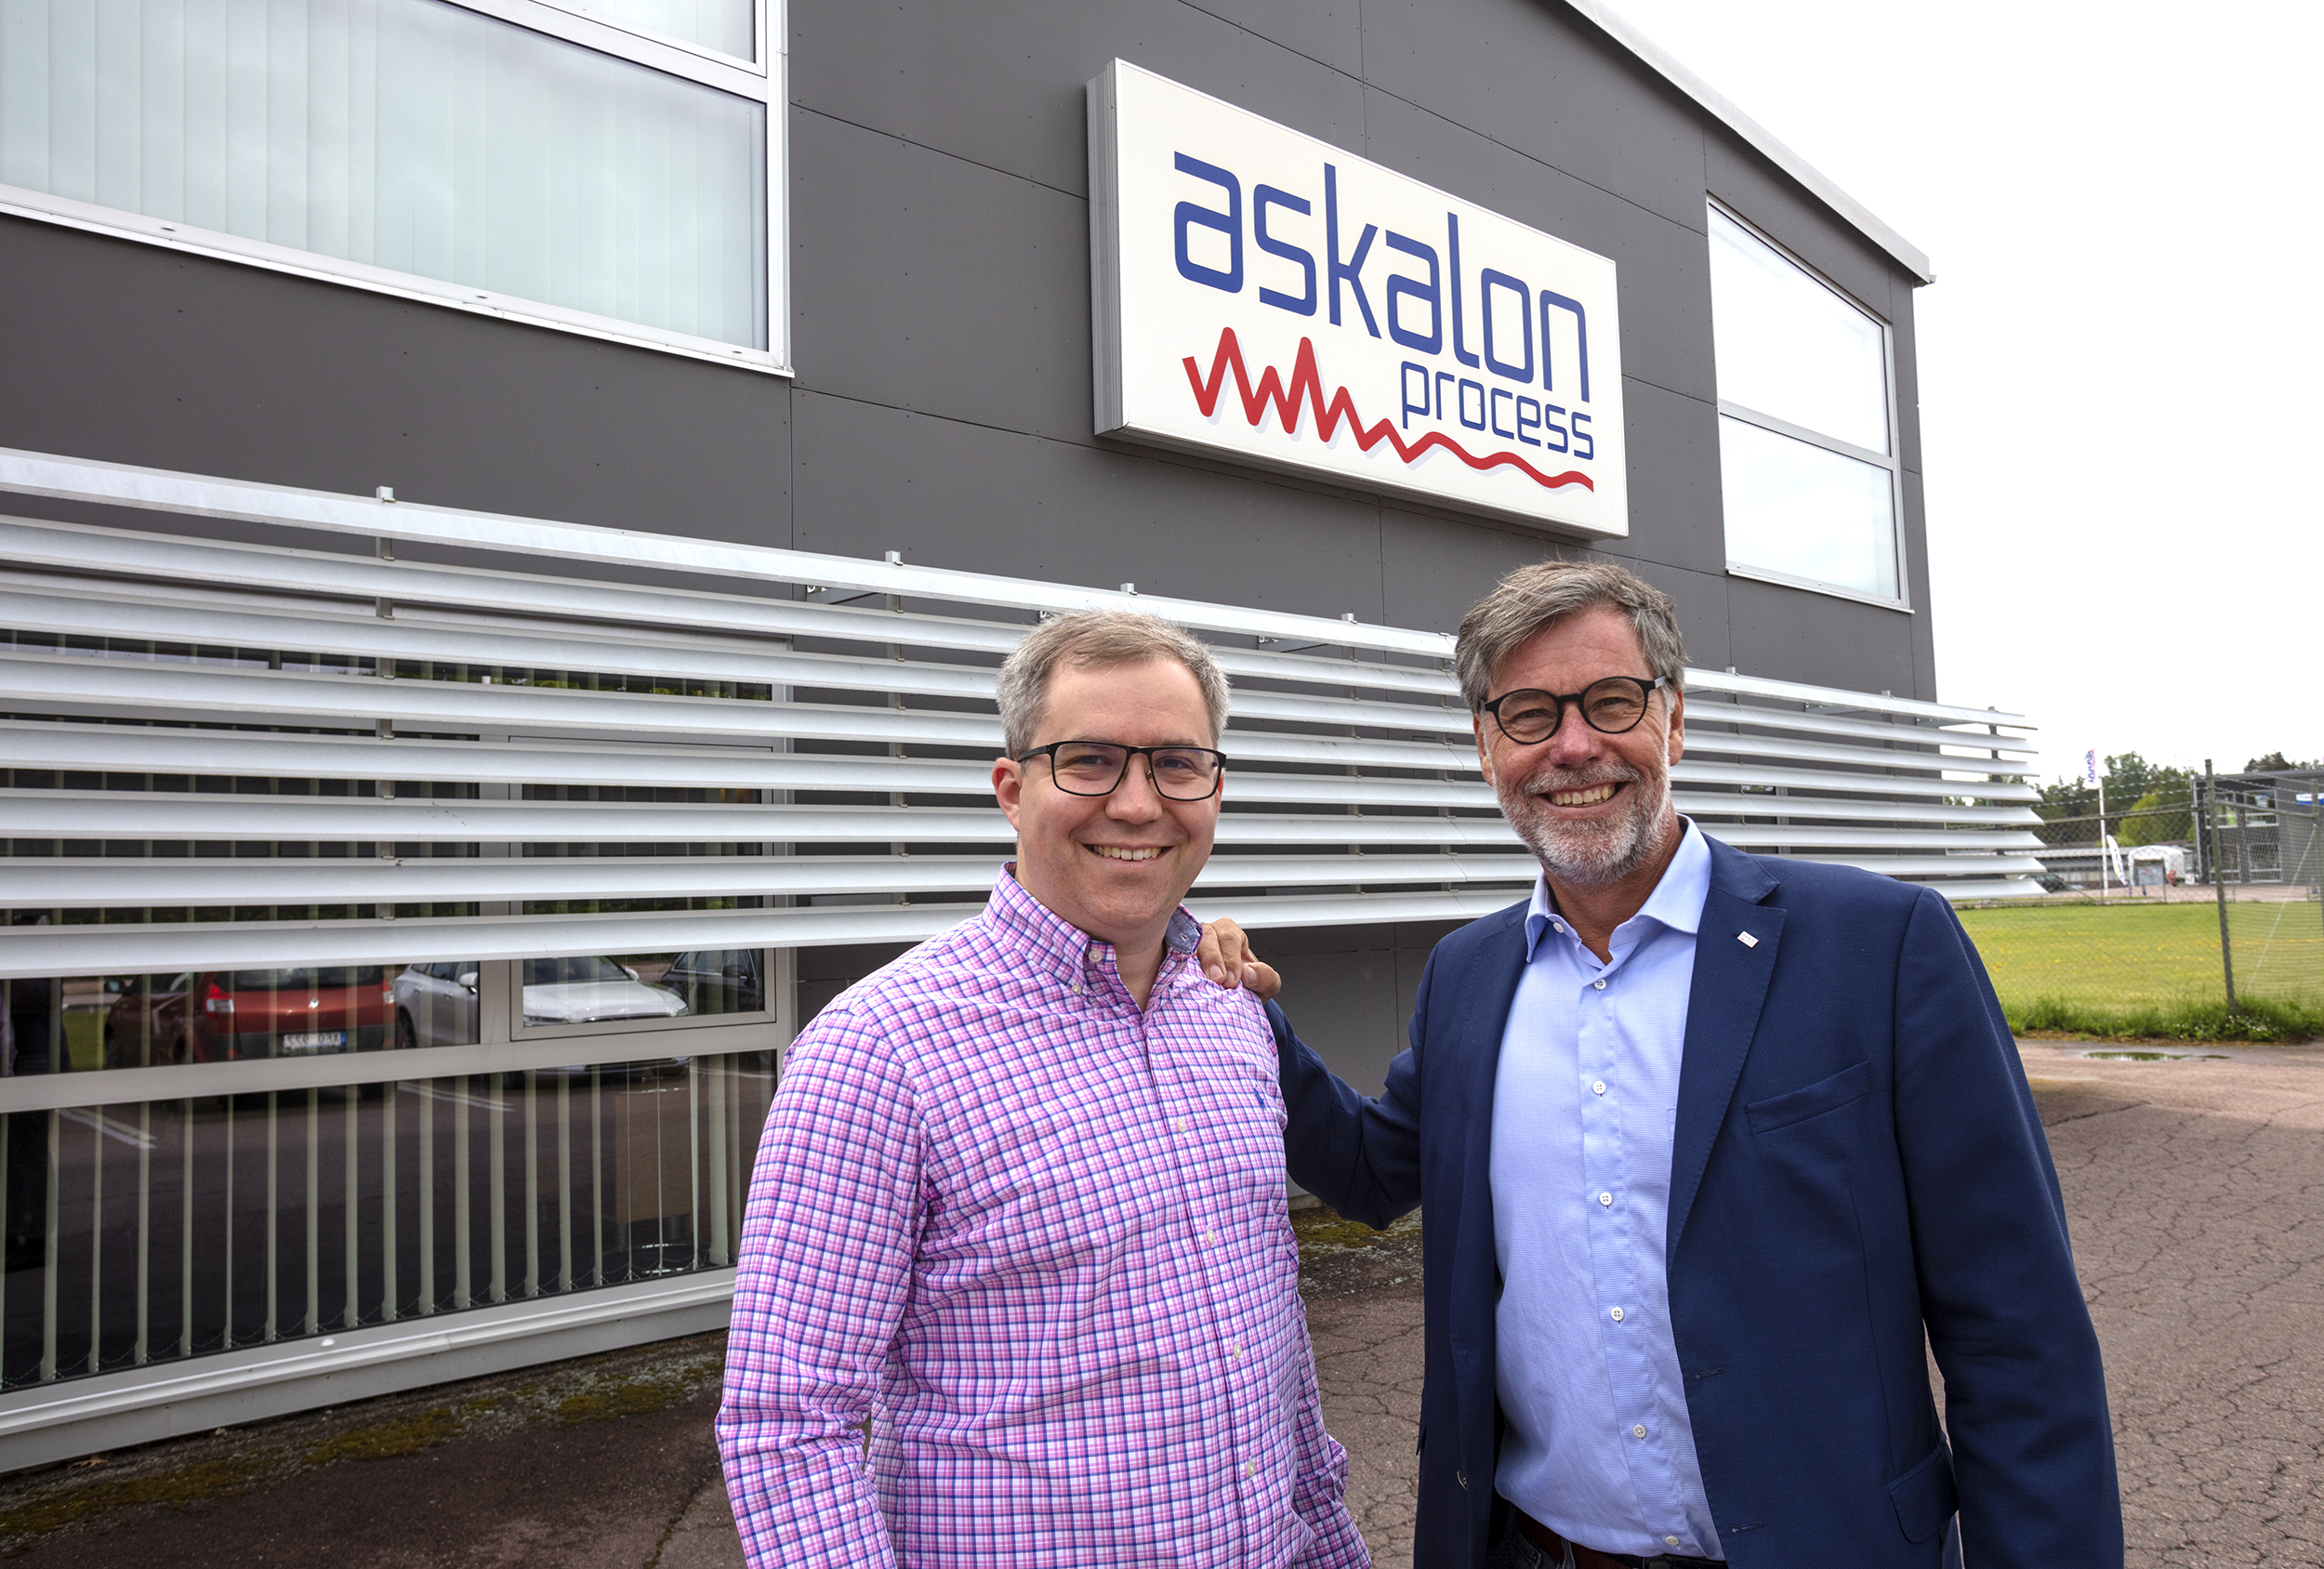 Mats Warnqvist welcomes Morten Noppenau as the new country and sales manager in Denmark